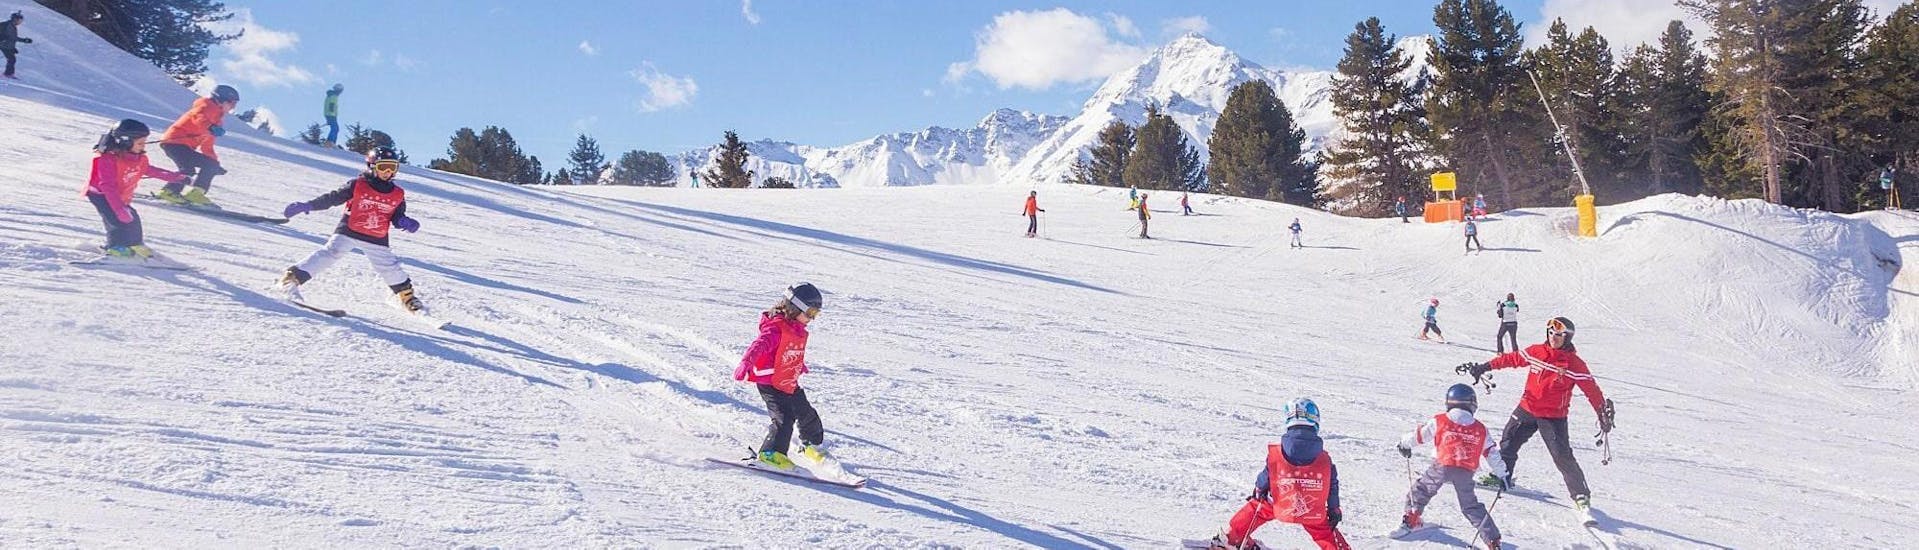 The ski instructor from Sertorelli Ski School Bormio is on the slopes with the participants during the Kid Ski Lessons (4-12 y.) for Advanced - Full Day.